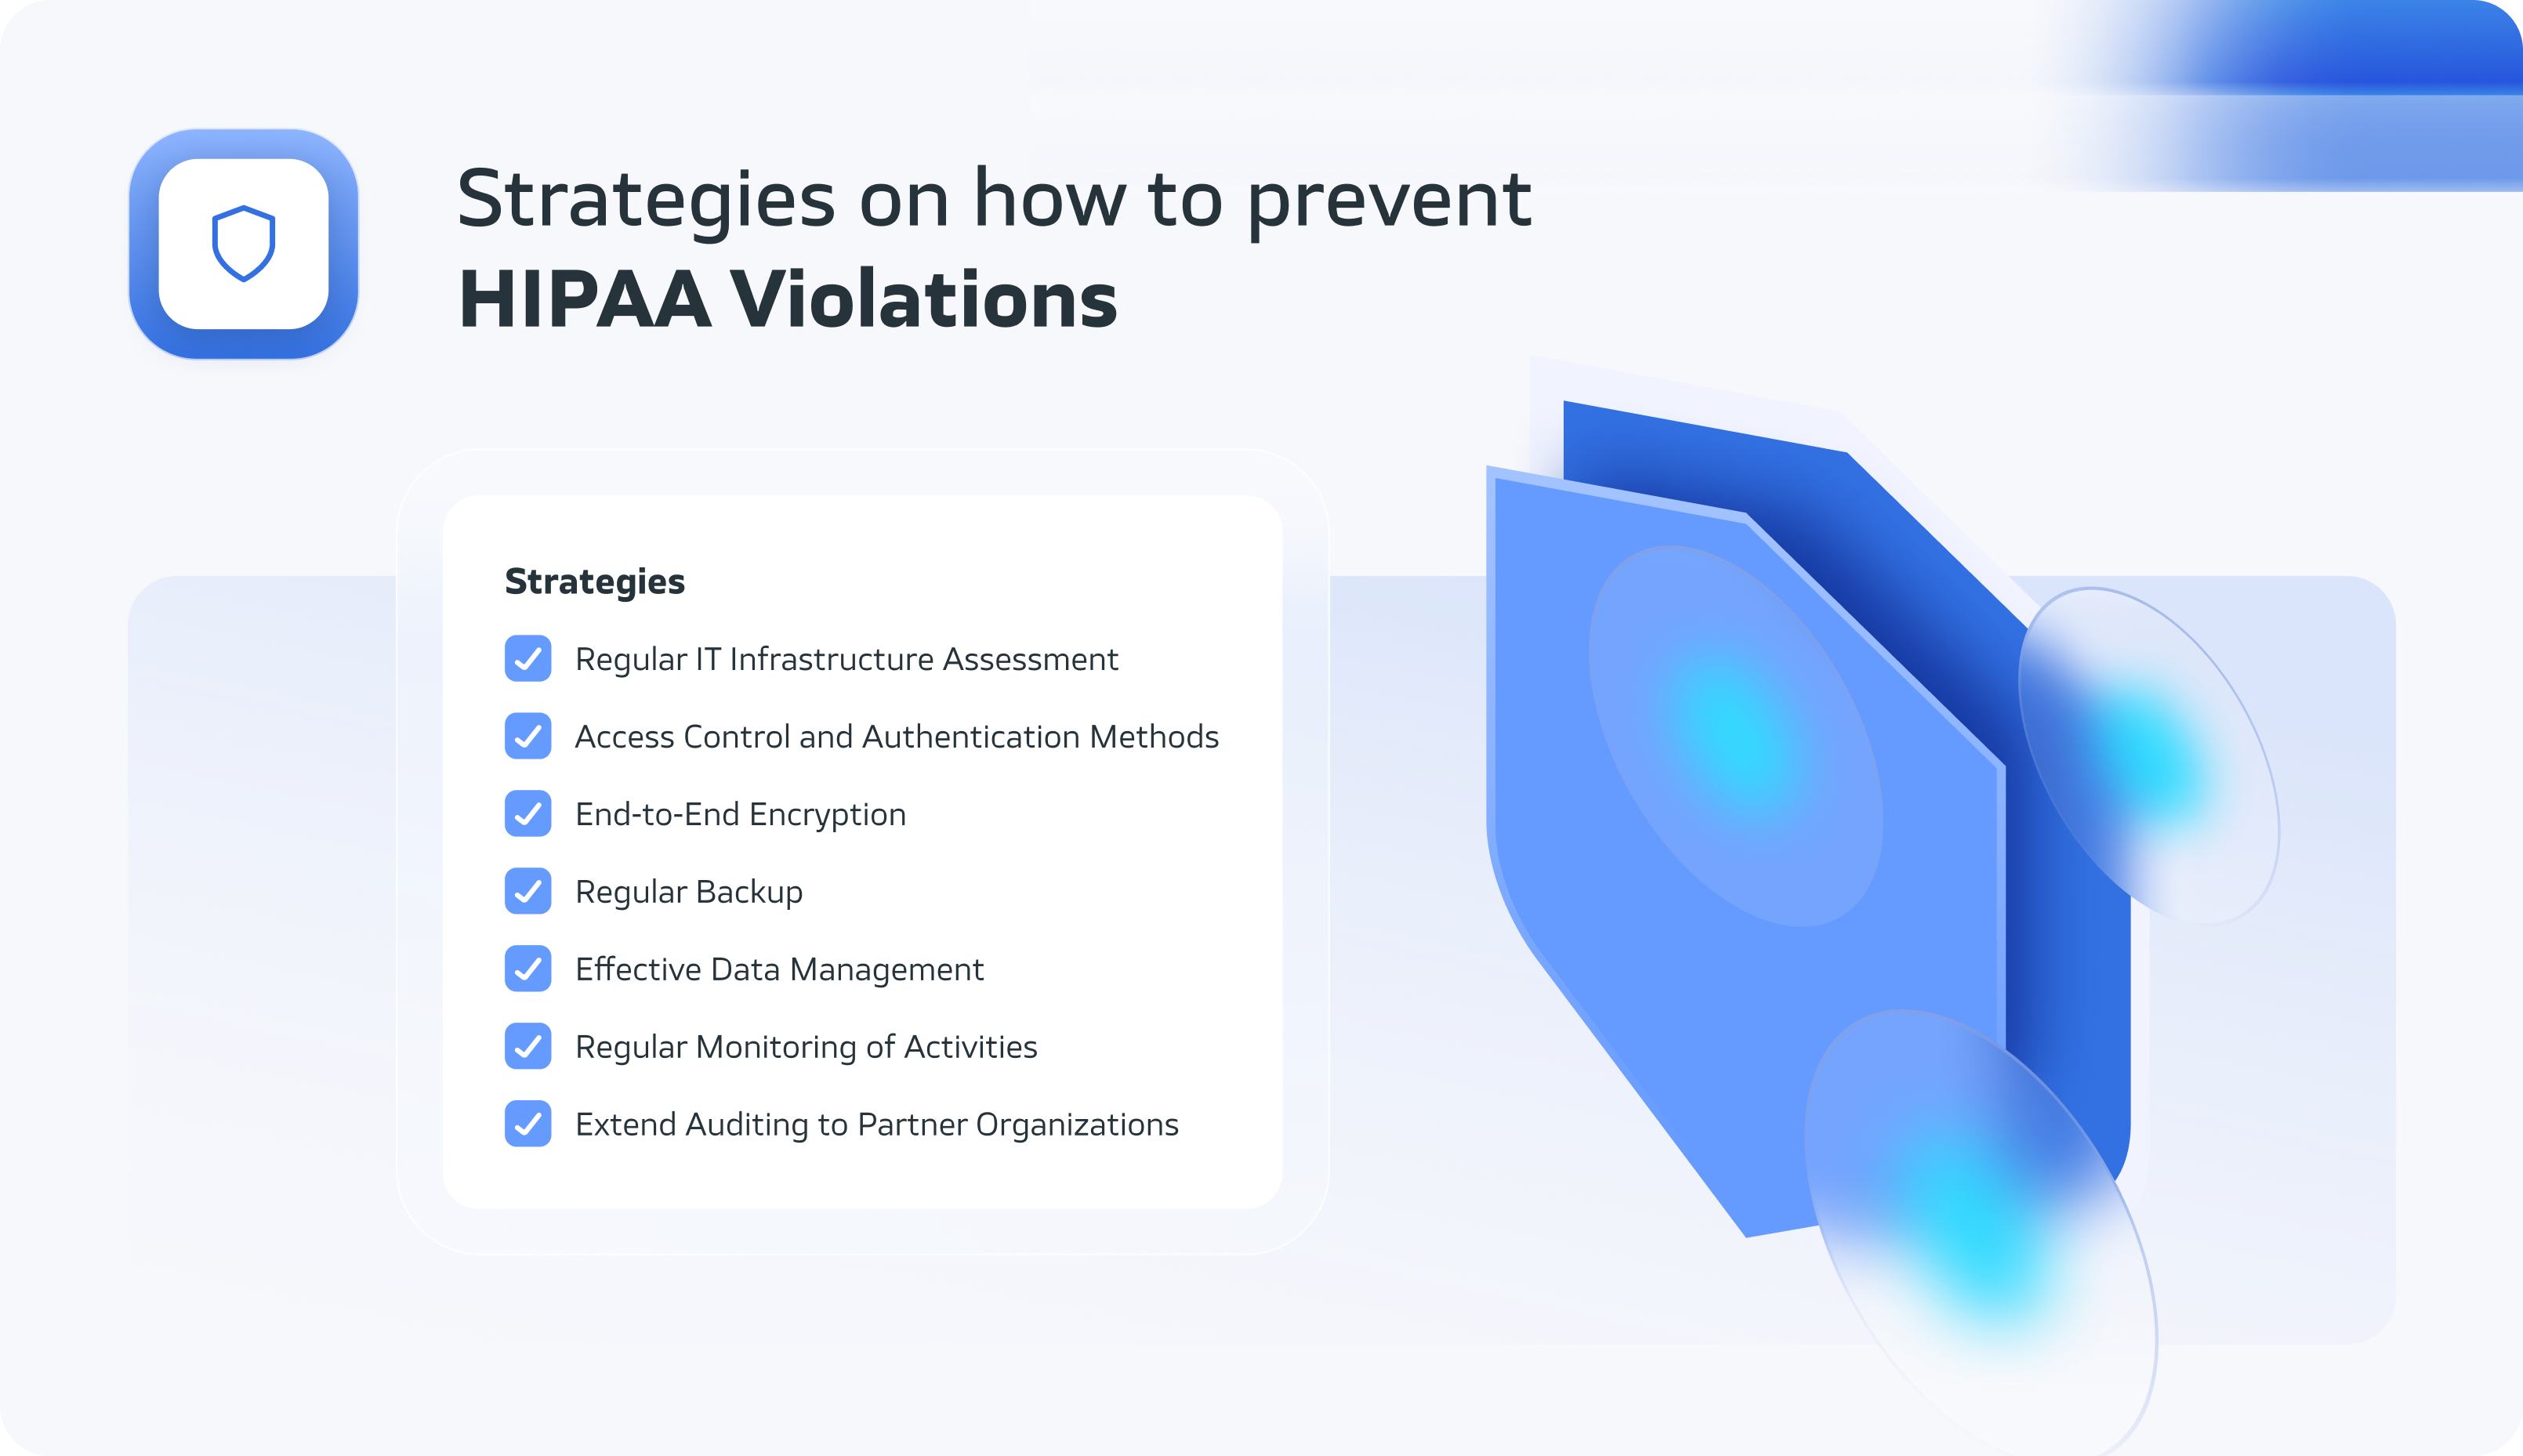 Strategies on how to prevent HIPAA violations